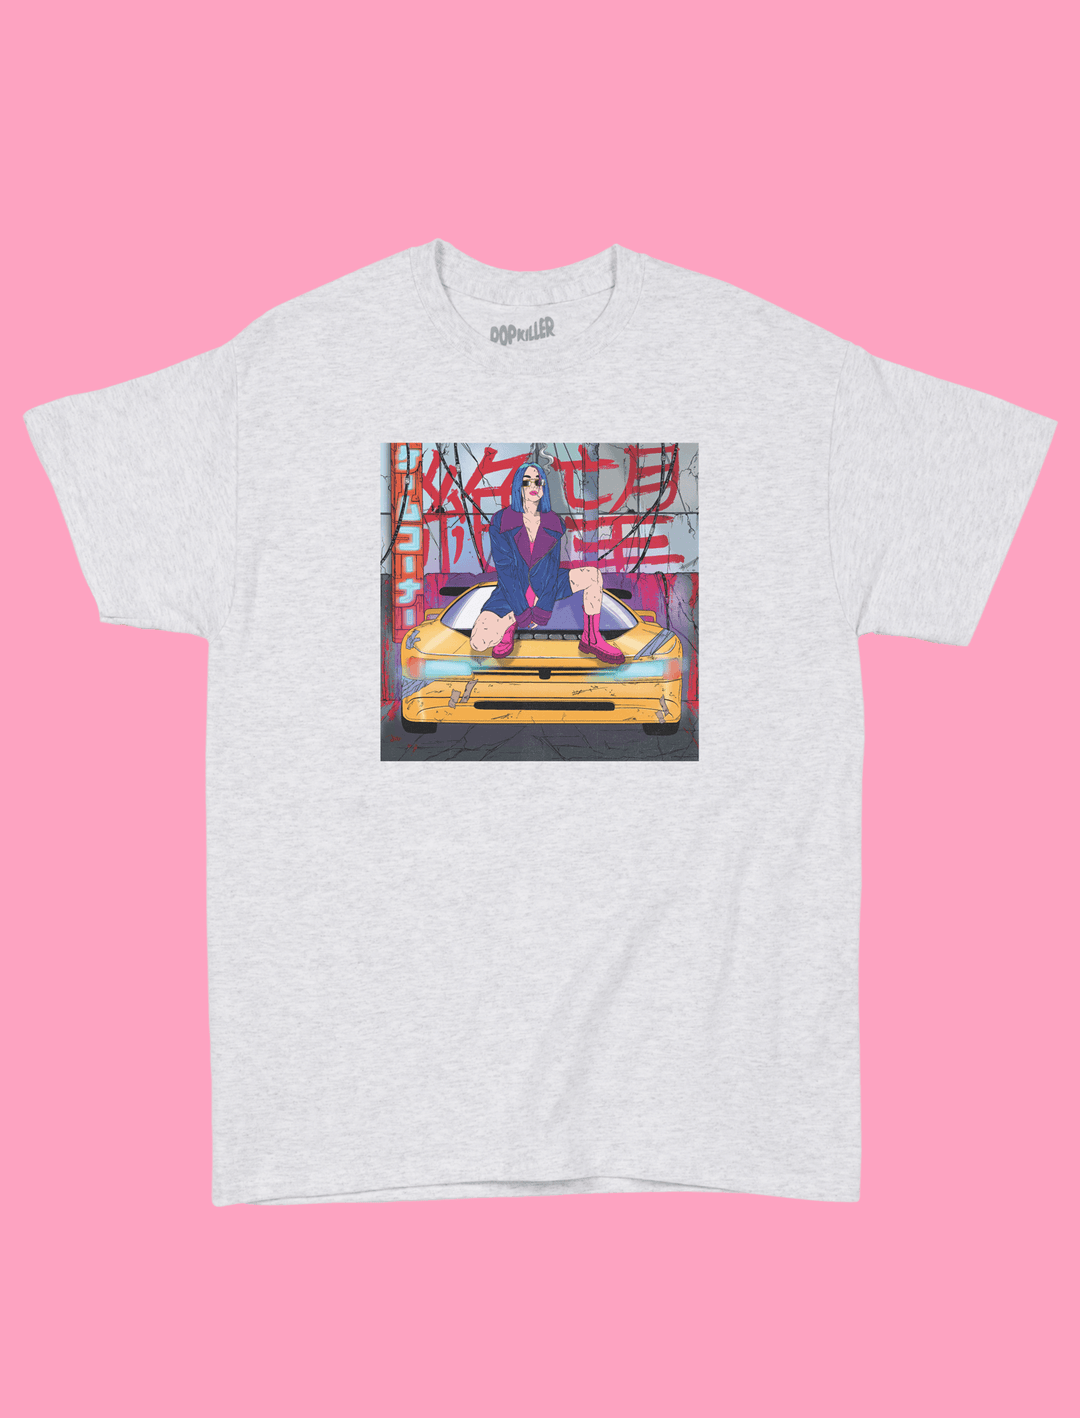 Aesthetic car street style graphic tee.